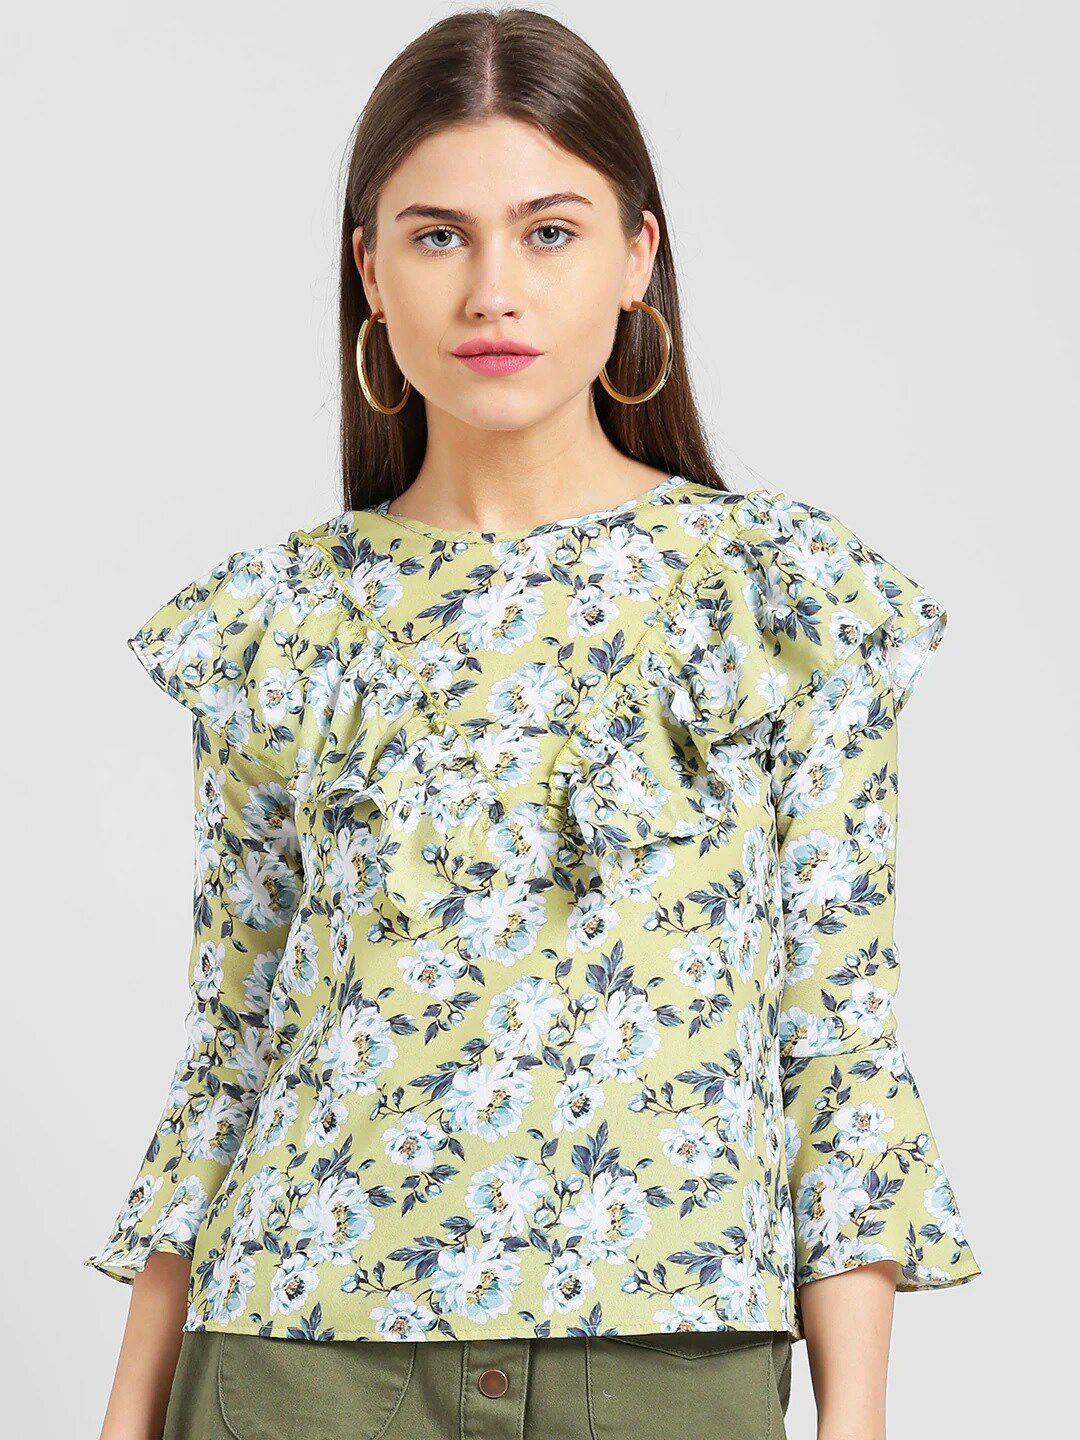 be-indi-women-olive-green-floral-print-ruffles-top